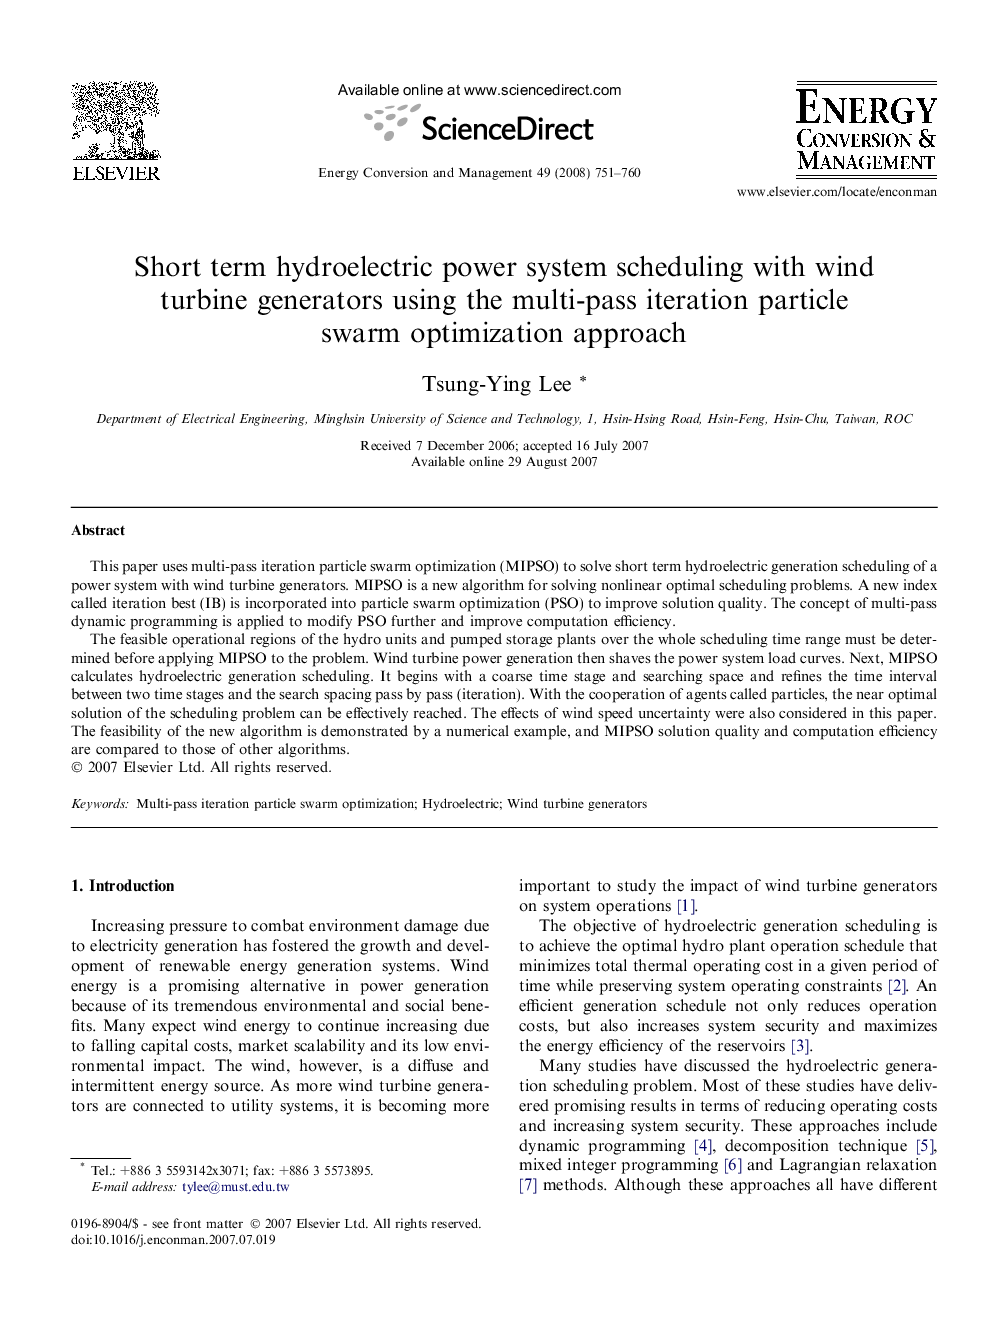 Short term hydroelectric power system scheduling with wind turbine generators using the multi-pass iteration particle swarm optimization approach